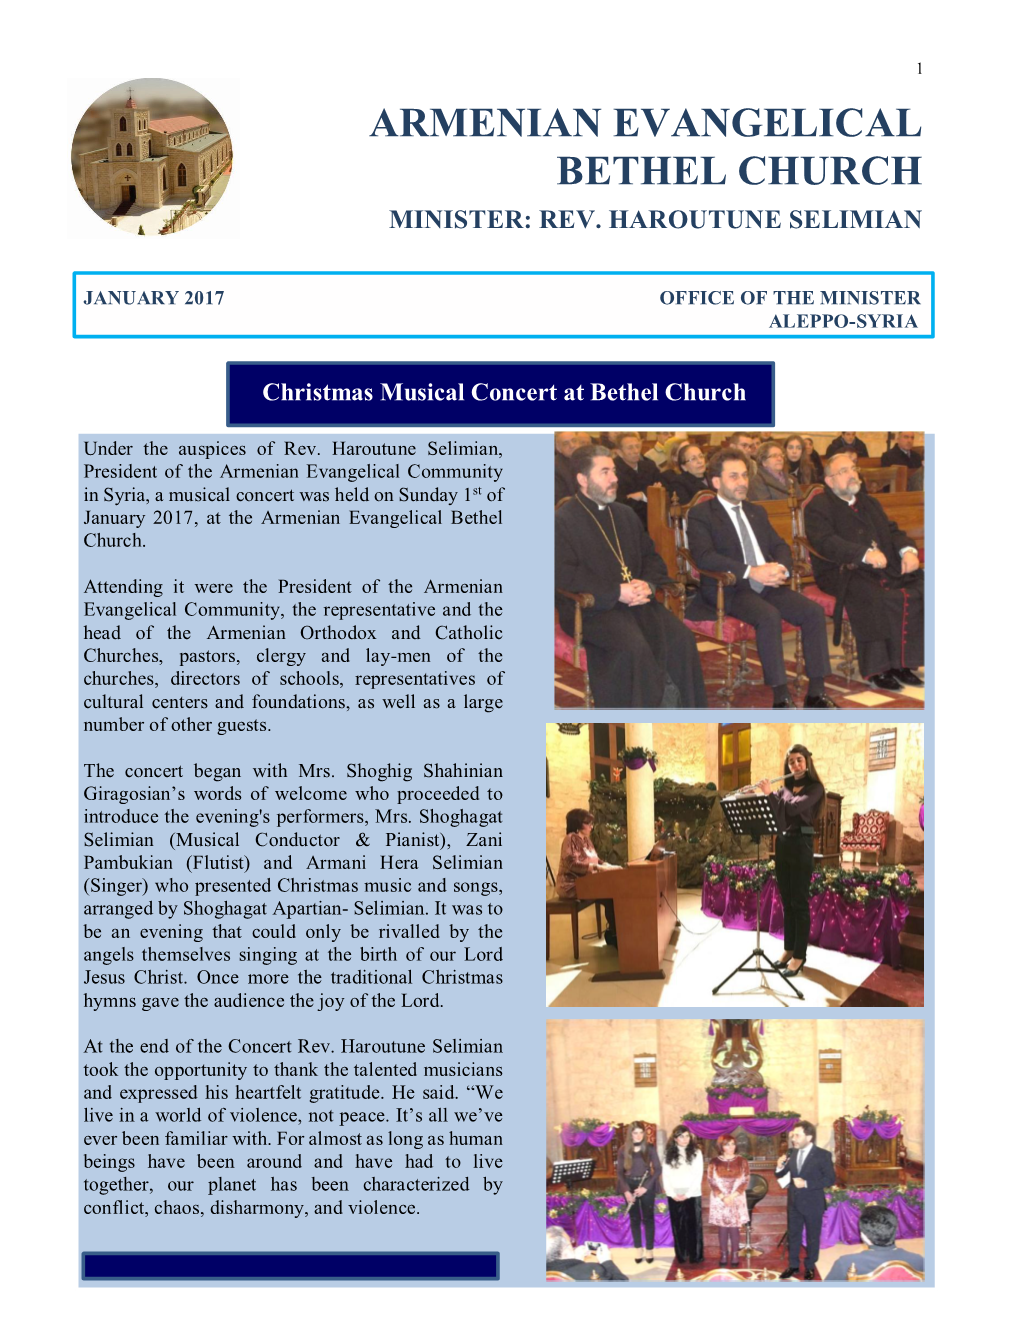 Annual Report of the Armenian Evangelical 'Bethel' Church In